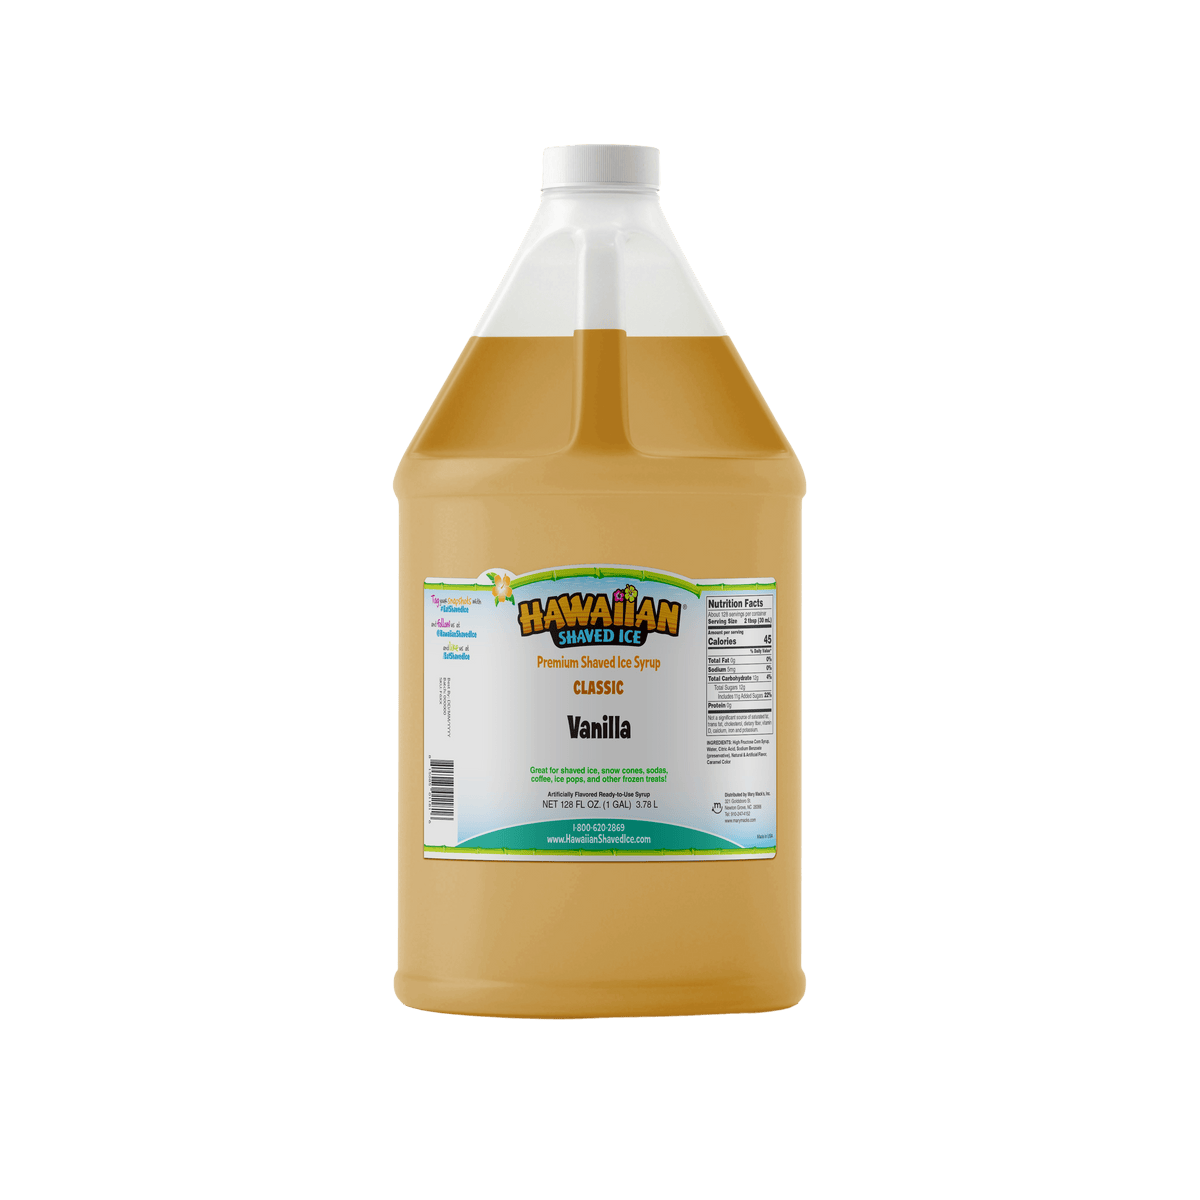 A gallon (128-oz) of Hawaiian Shaved Ice Vanilla Flavored syrup, Light Brown